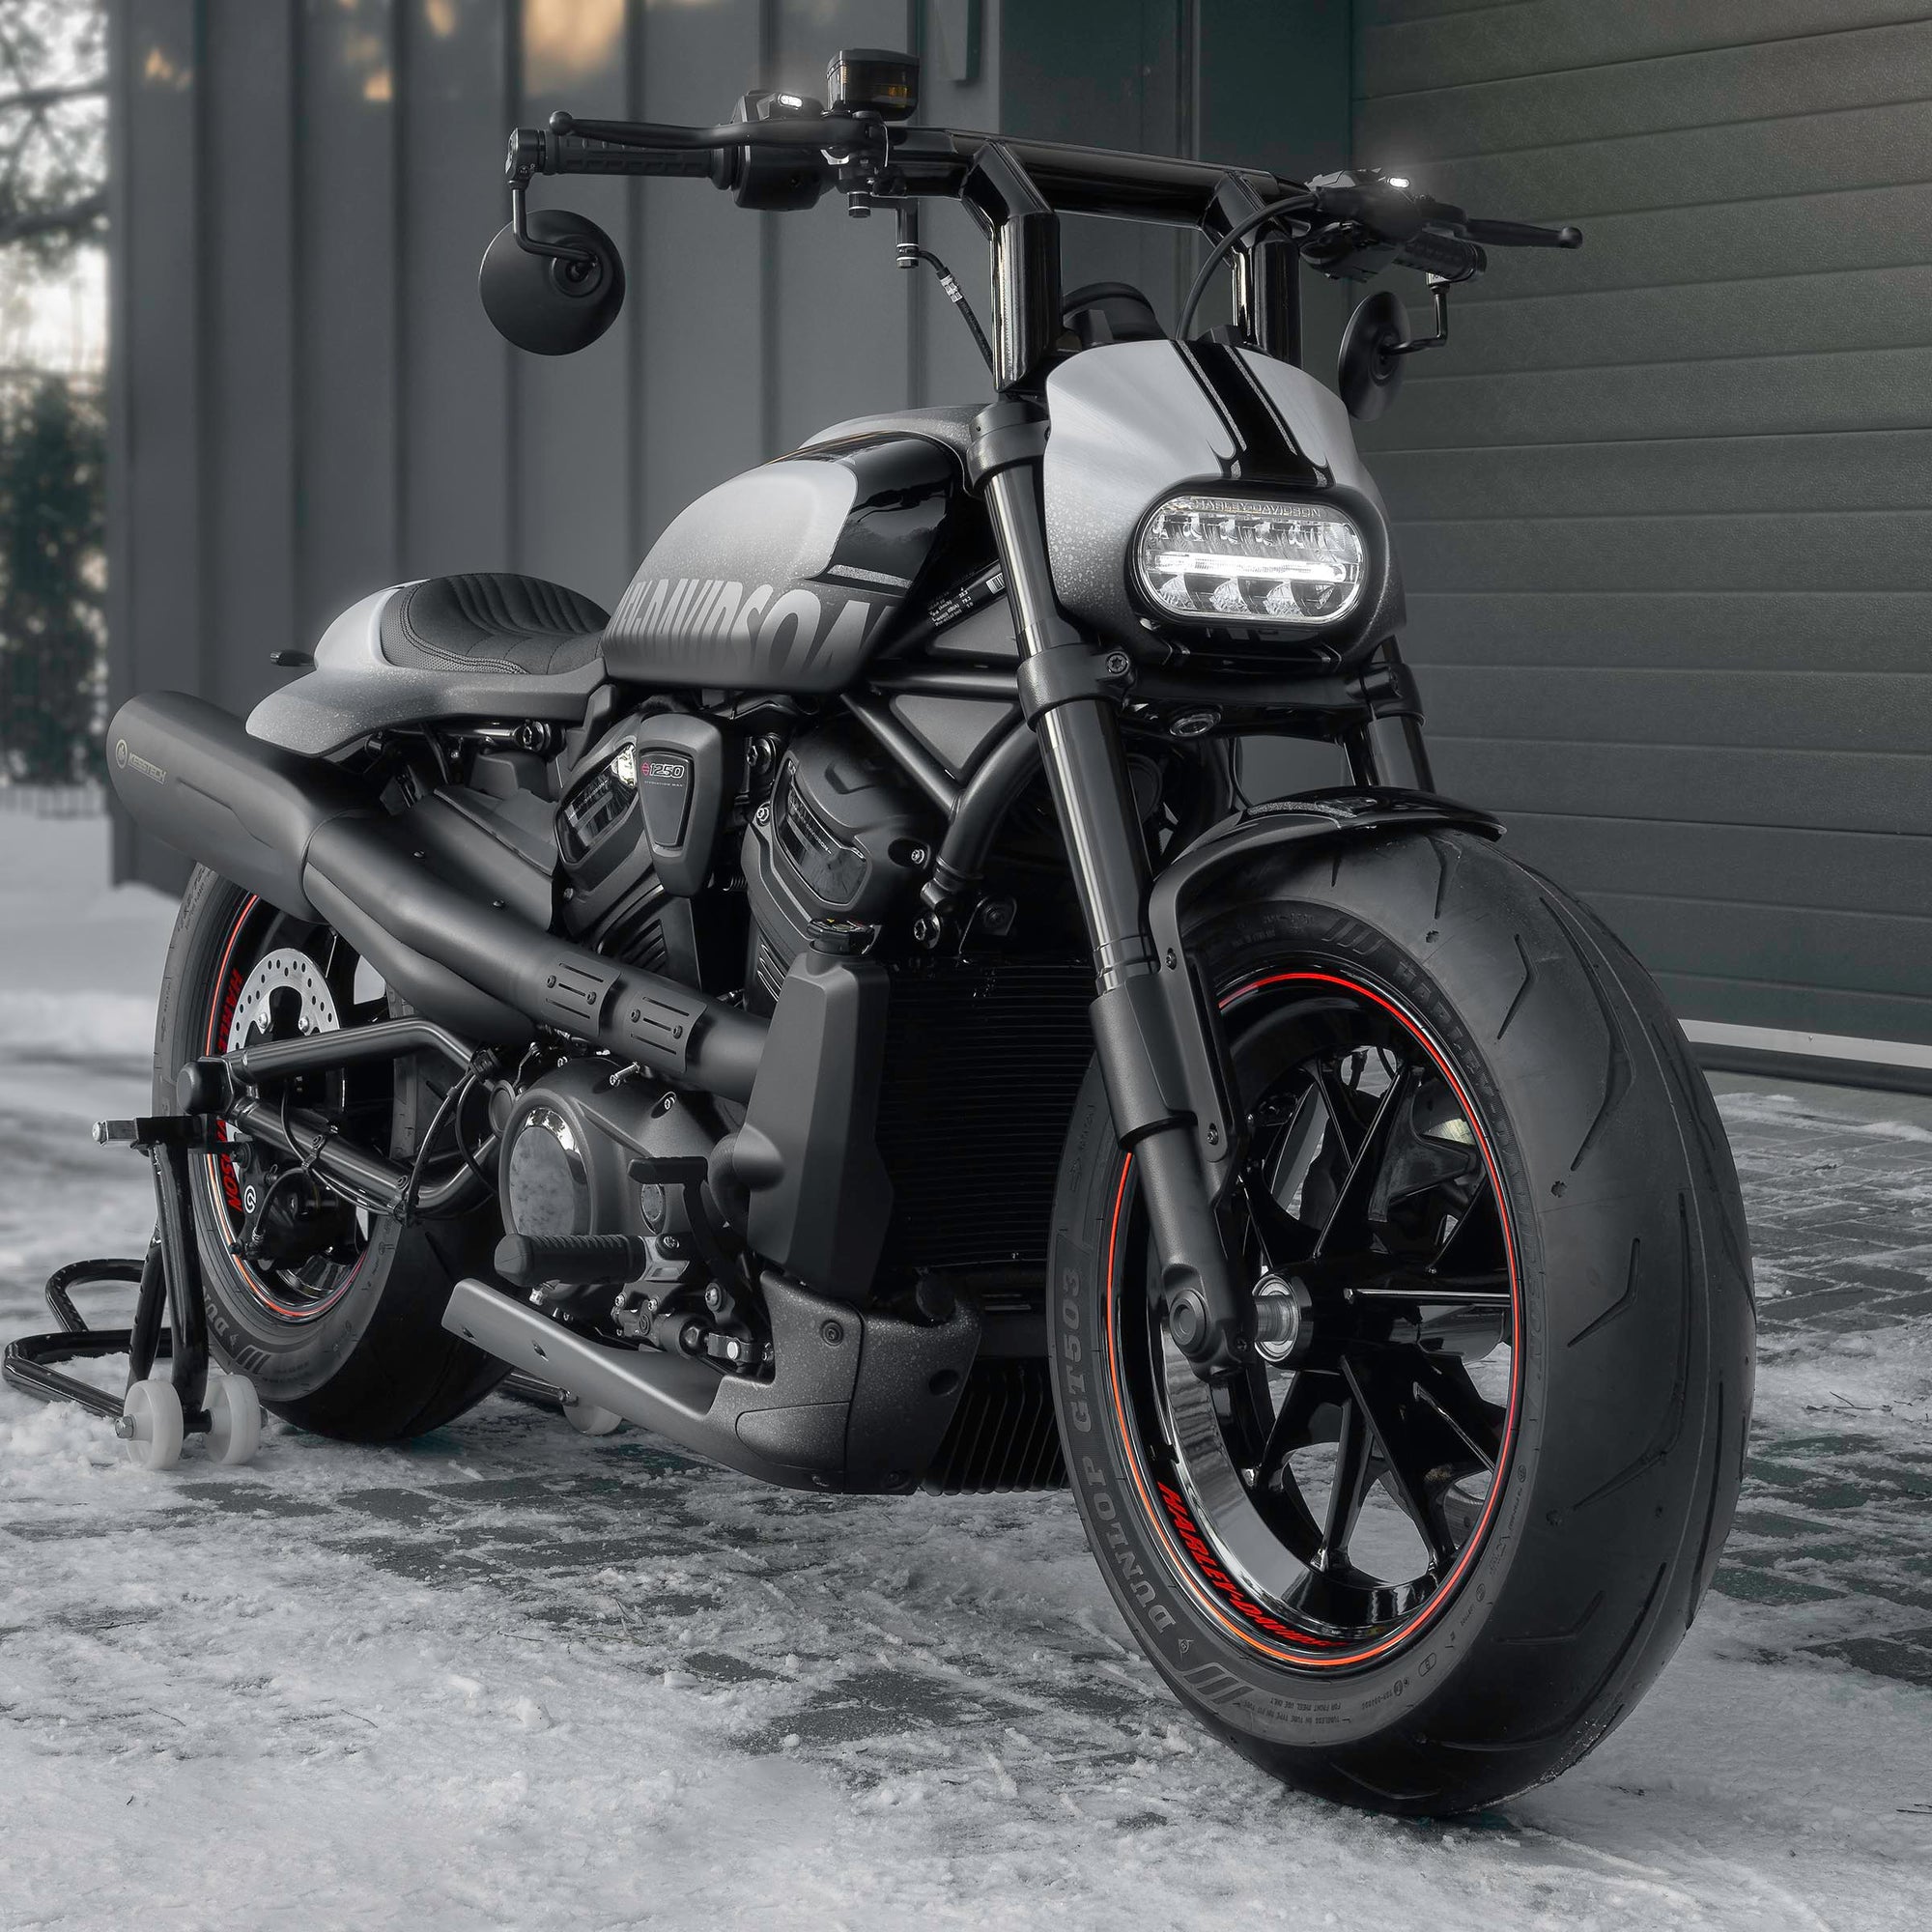 Harley Davidson motorcycle with Killer Custom parts from the front outside with some visible snow and a modern garage in the background